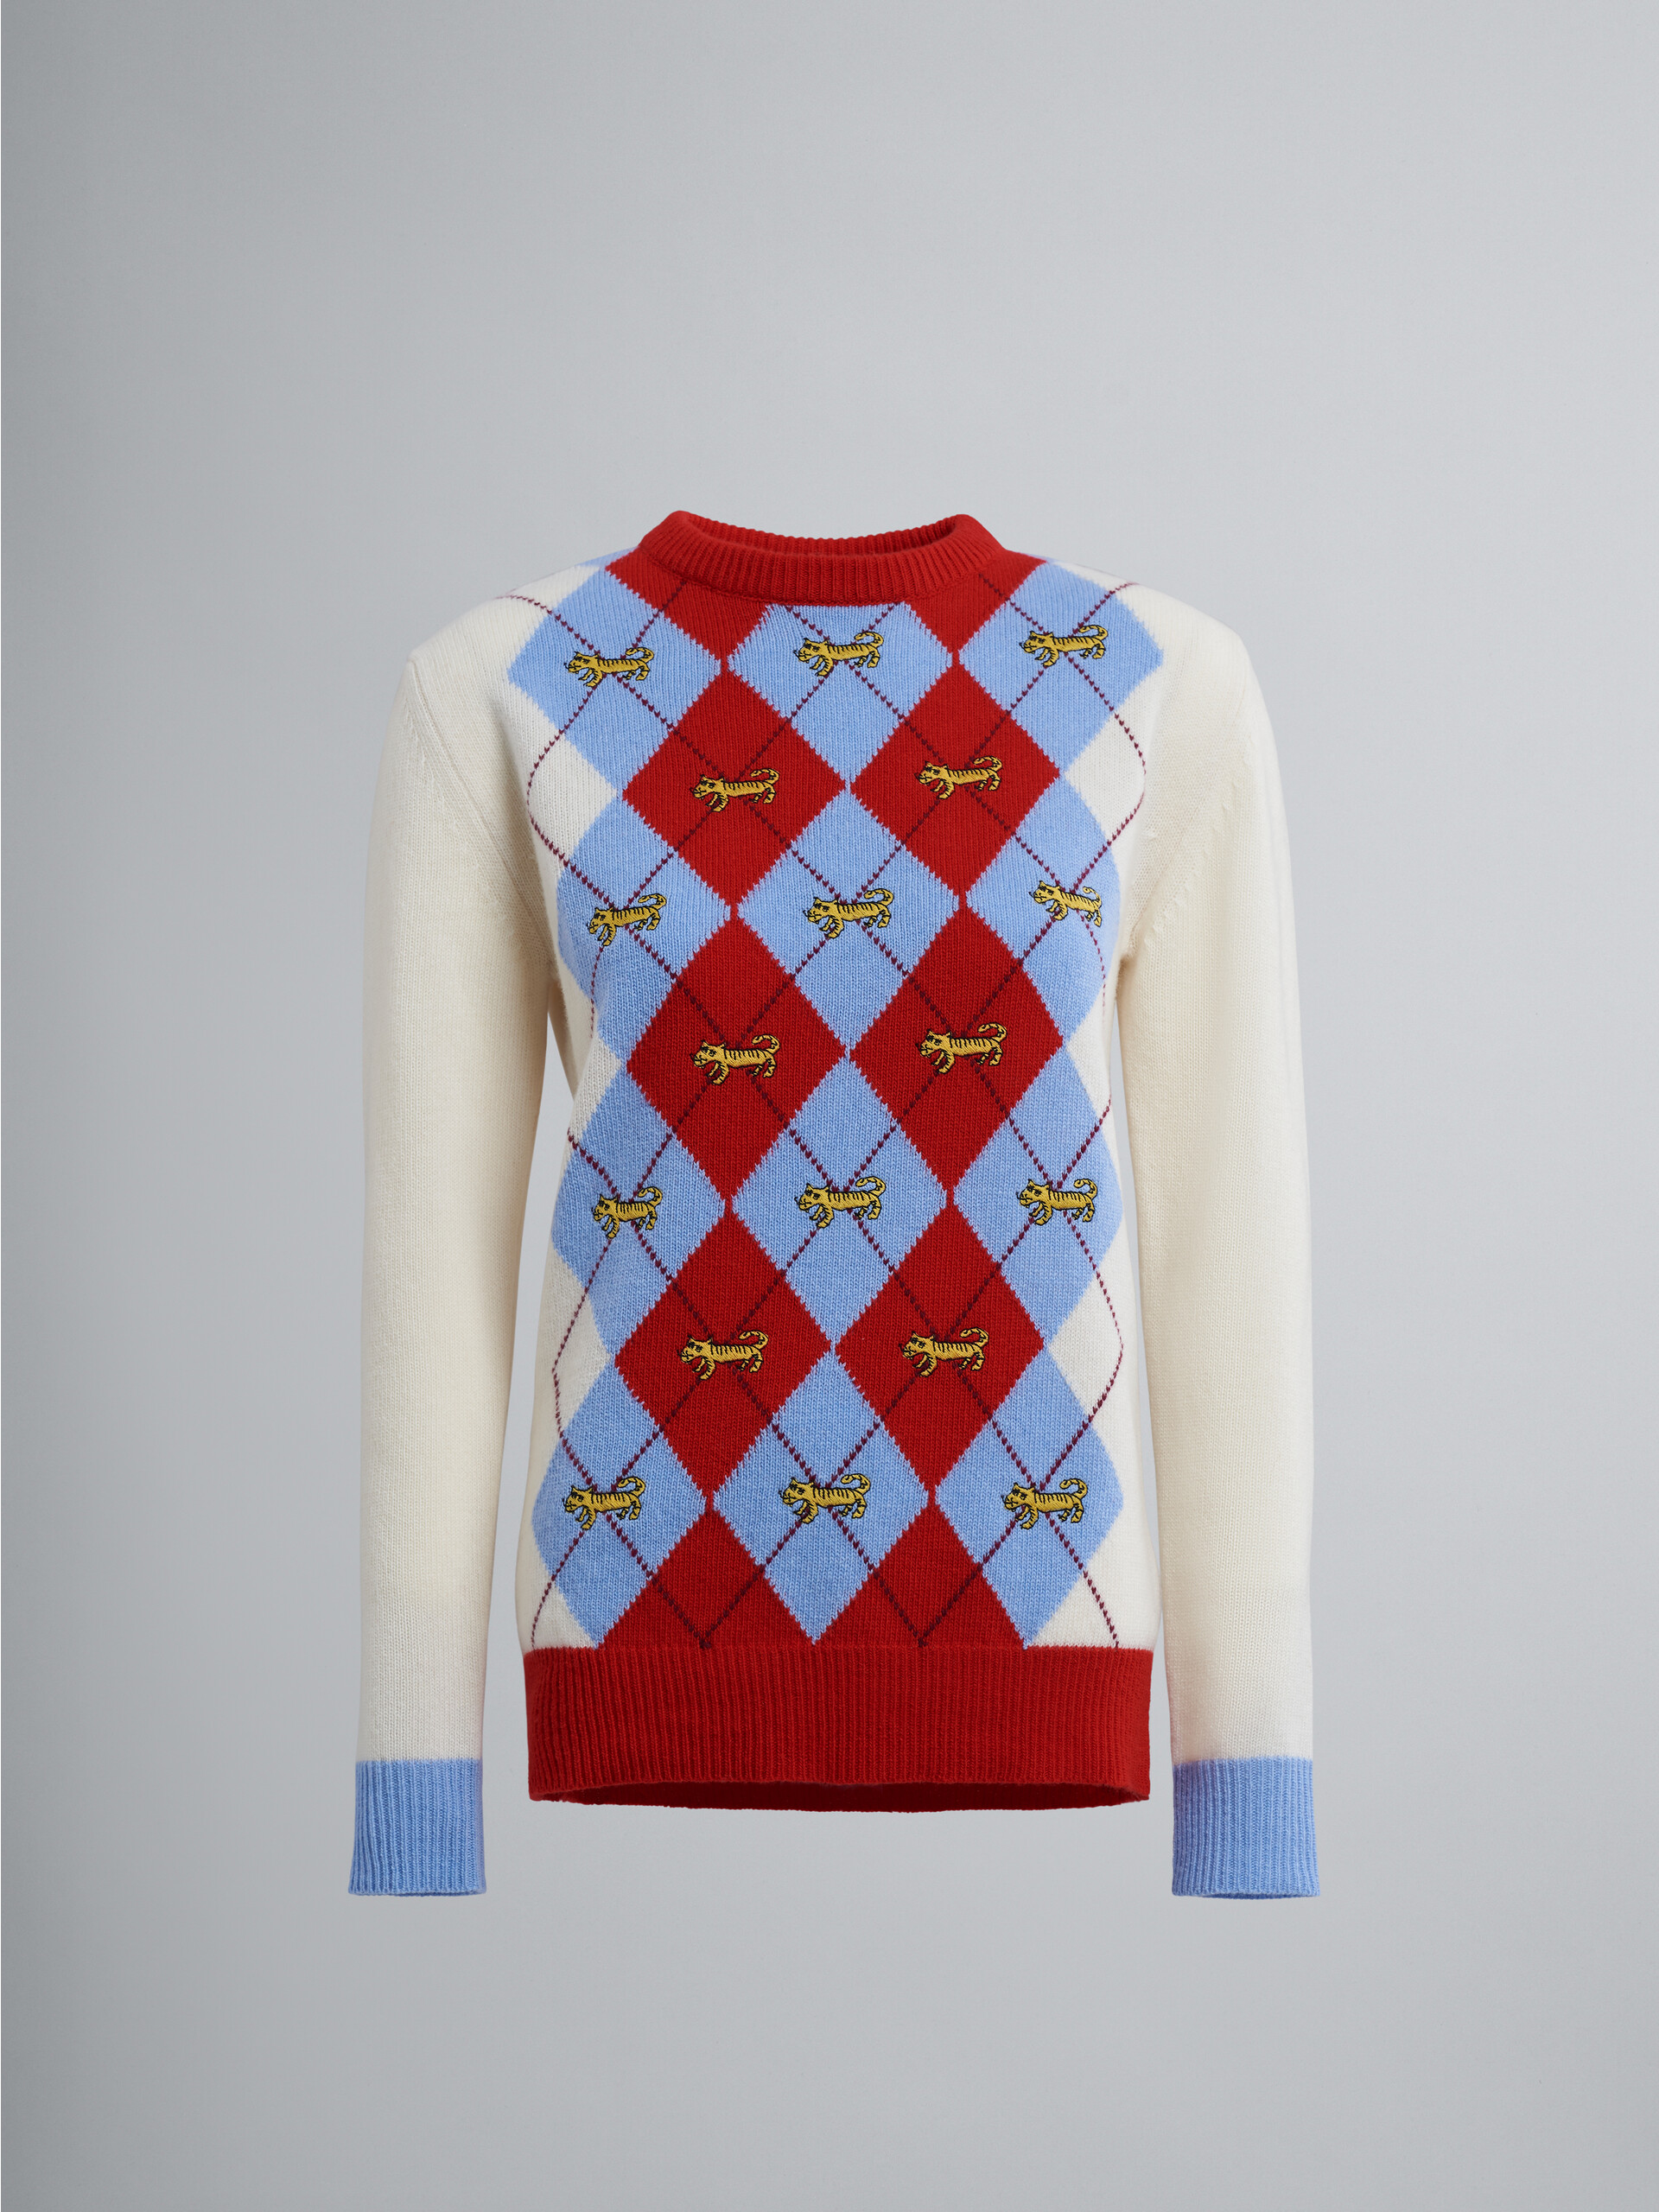 Shetland sweater with Naif Tiger Argyle motif - Pullovers - Image 1